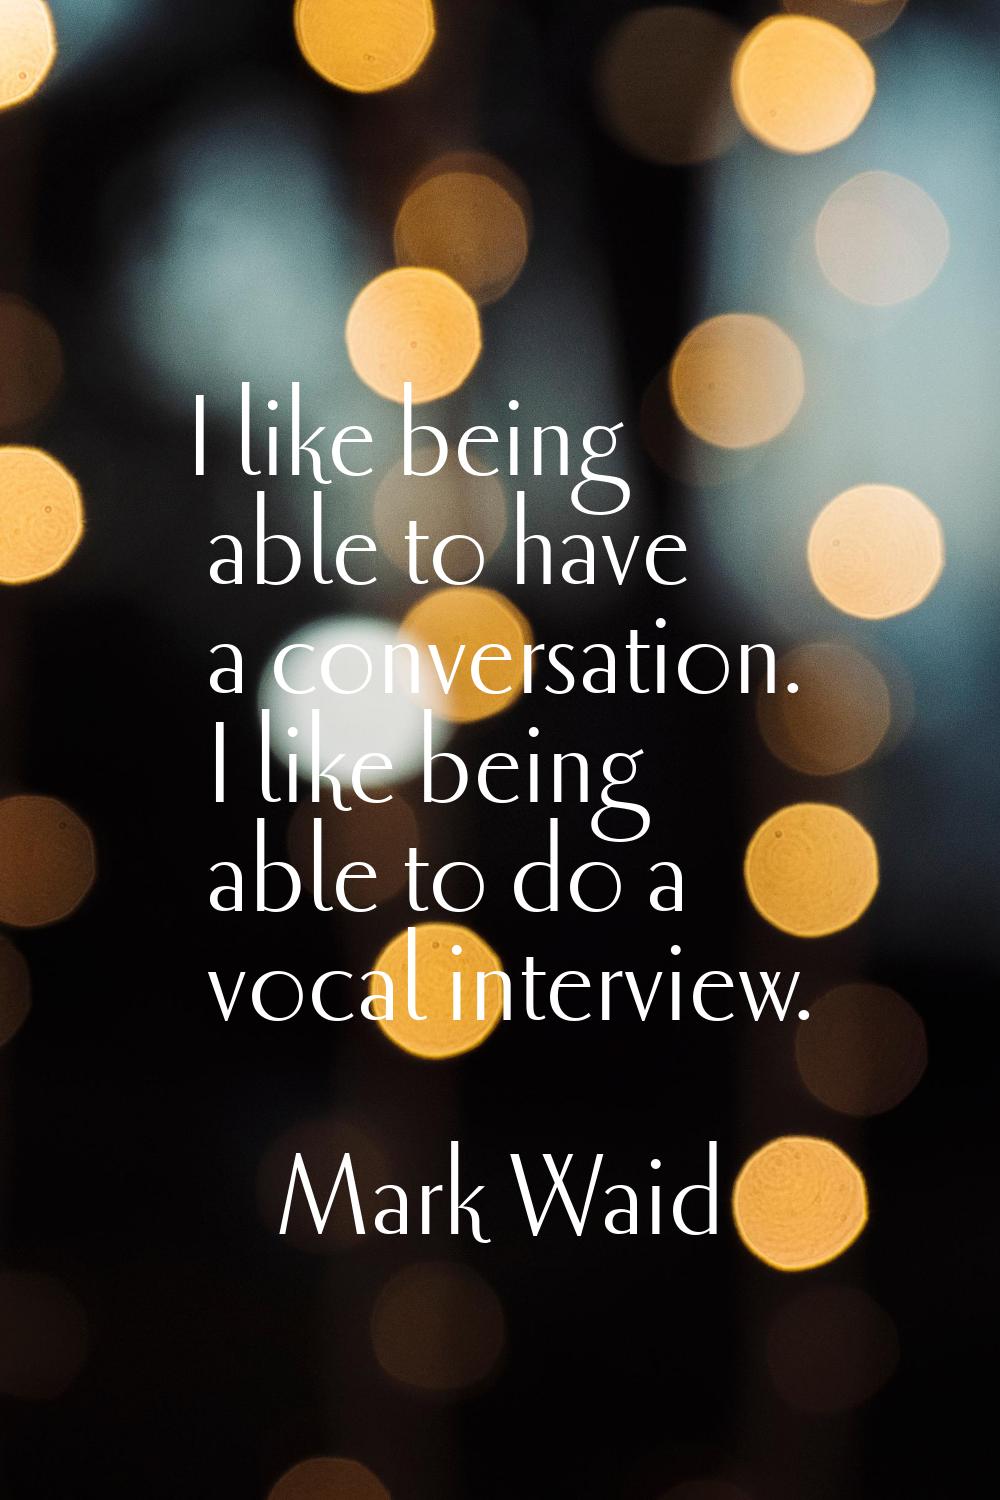 I like being able to have a conversation. I like being able to do a vocal interview.